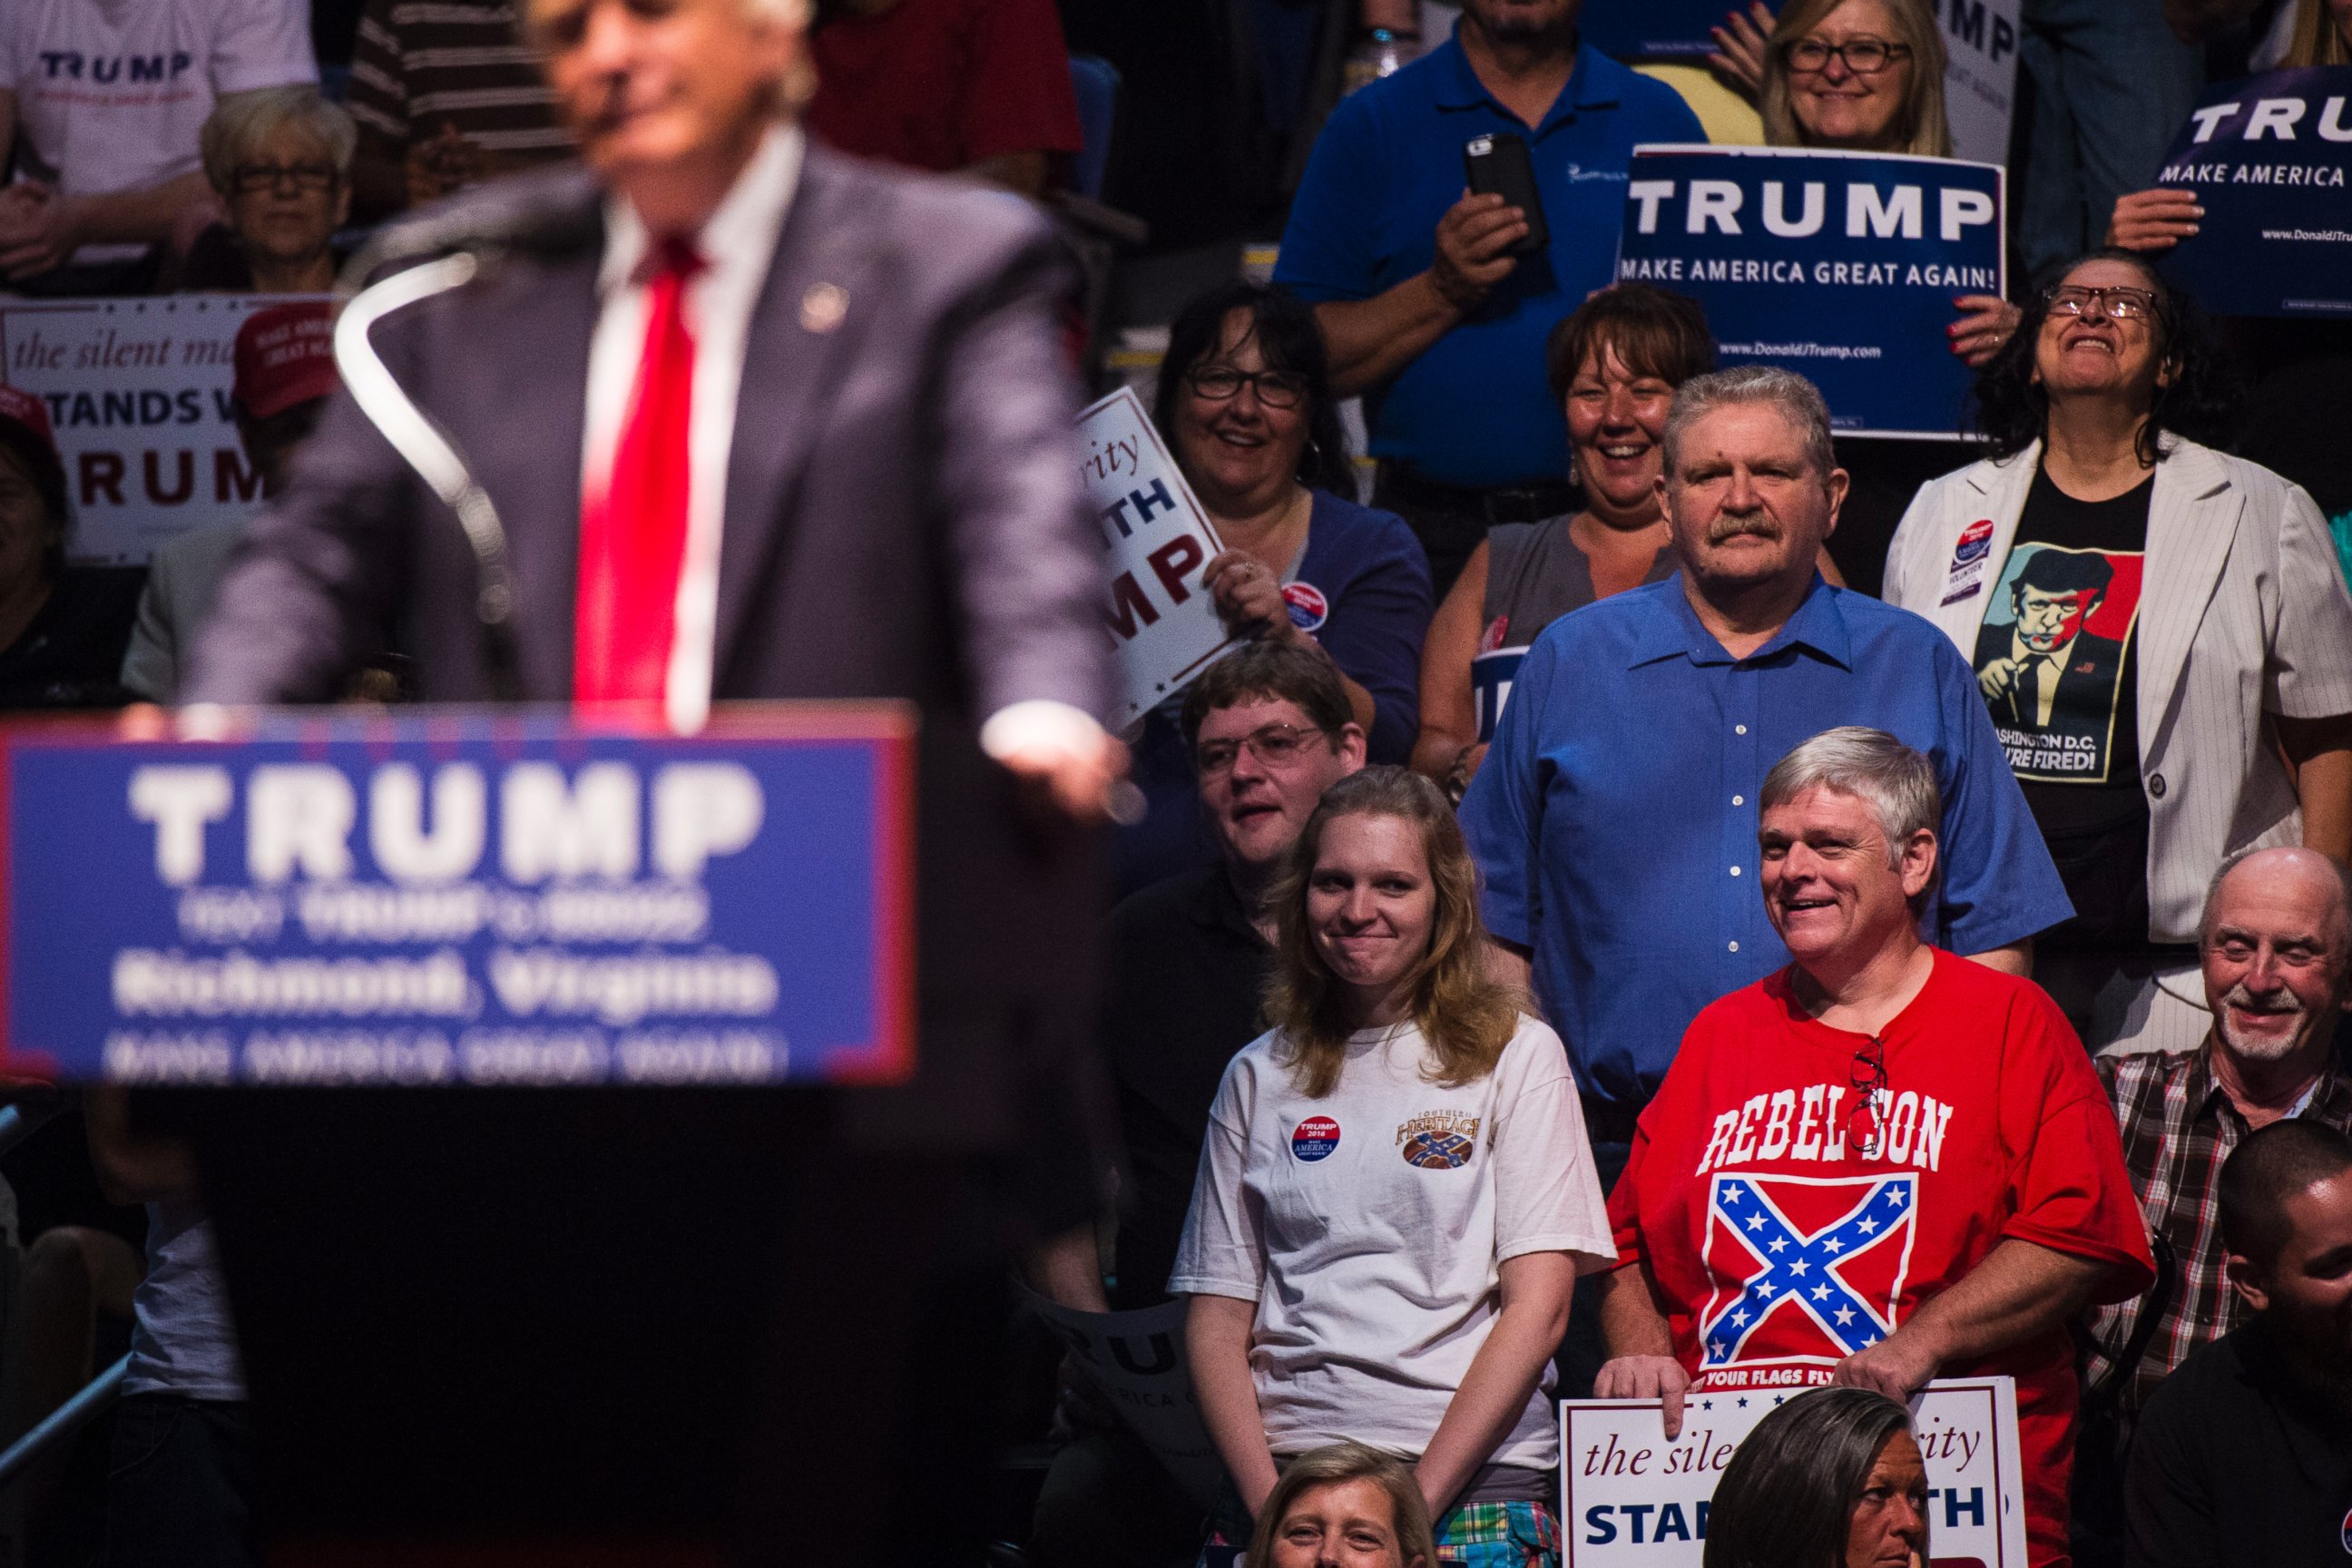 PHOTO: A man wears a shirt with a confederate flag on it as Republican presidential candidate Donald Trump speaks during a rally at the Richmond Coliseum in Richmond, Virginia, June 10, 2016. 